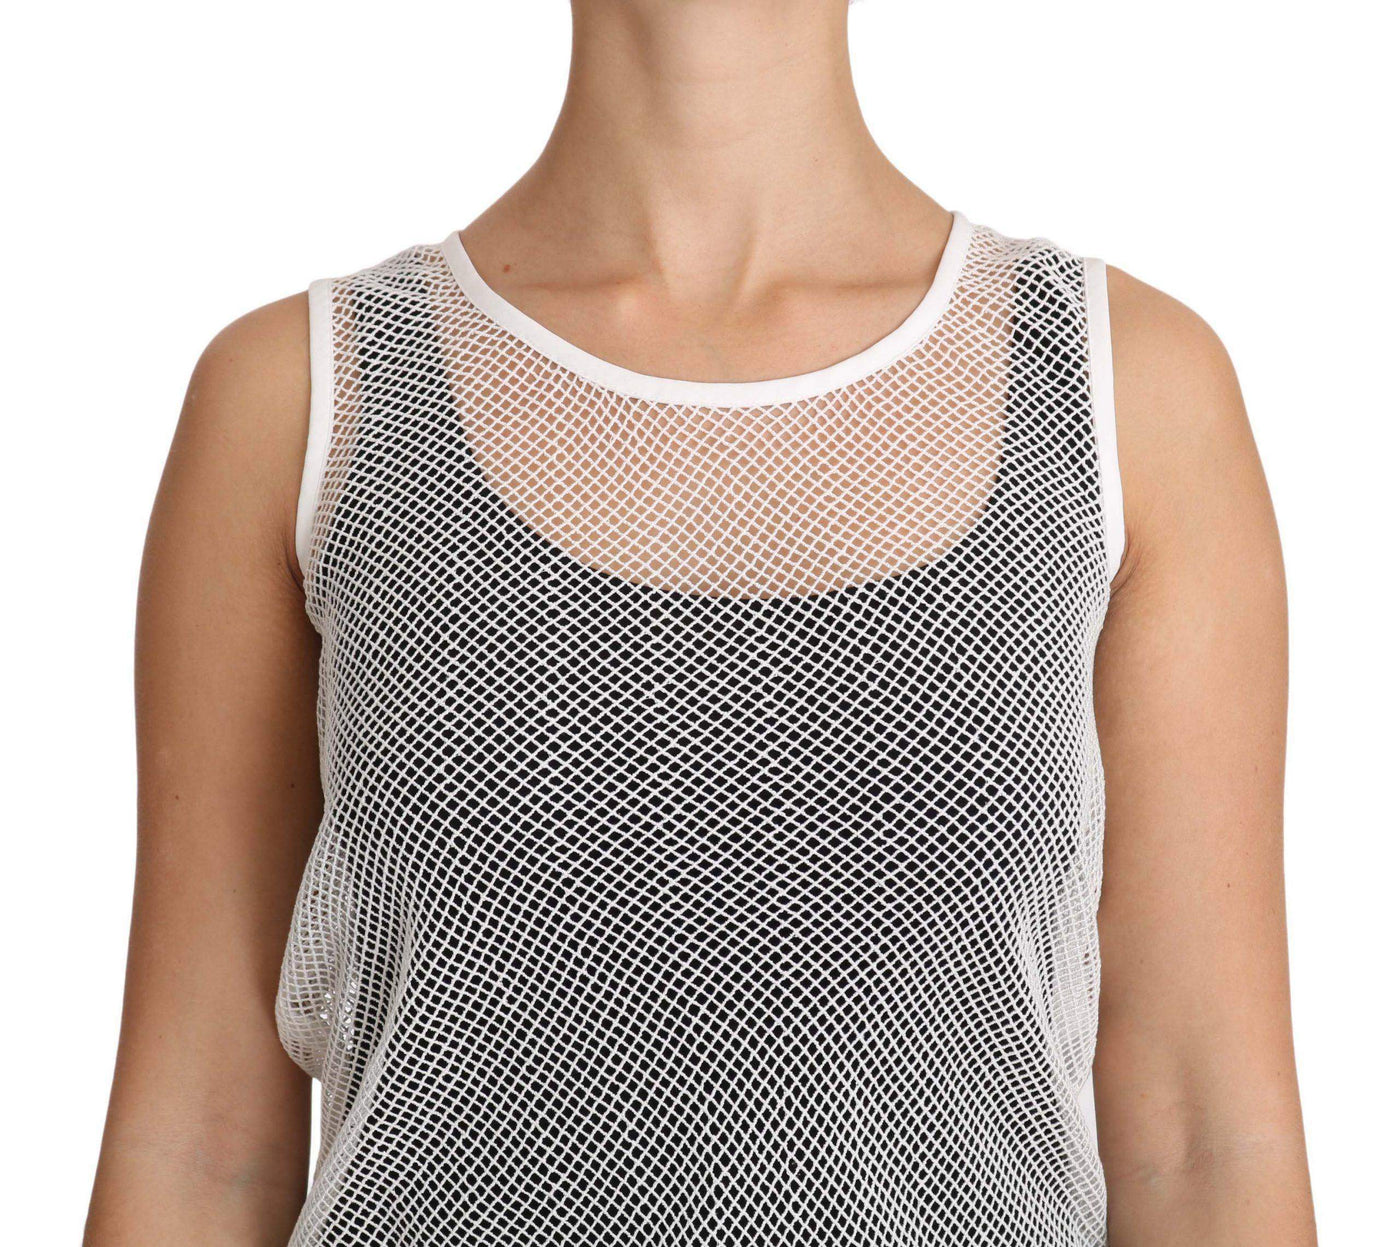 Dolce & Gabbana  White Net  Transparent Sleeveless Tank Top #women, Brand_Dolce & Gabbana, Catch, Dolce & Gabbana, feed-agegroup-adult, feed-color-white, feed-gender-female, feed-size-IT36 | XS, feed-size-IT40|S, feed-size-IT42|M, feed-size-IT44|L, feed-size-IT46|XL, Gender_Women, IT36 | XS, IT40|S, IT42|M, IT44|L, IT46|XL, Kogan, Tops & T-Shirts - Women - Clothing, White, Women - New Arrivals at SEYMAYKA